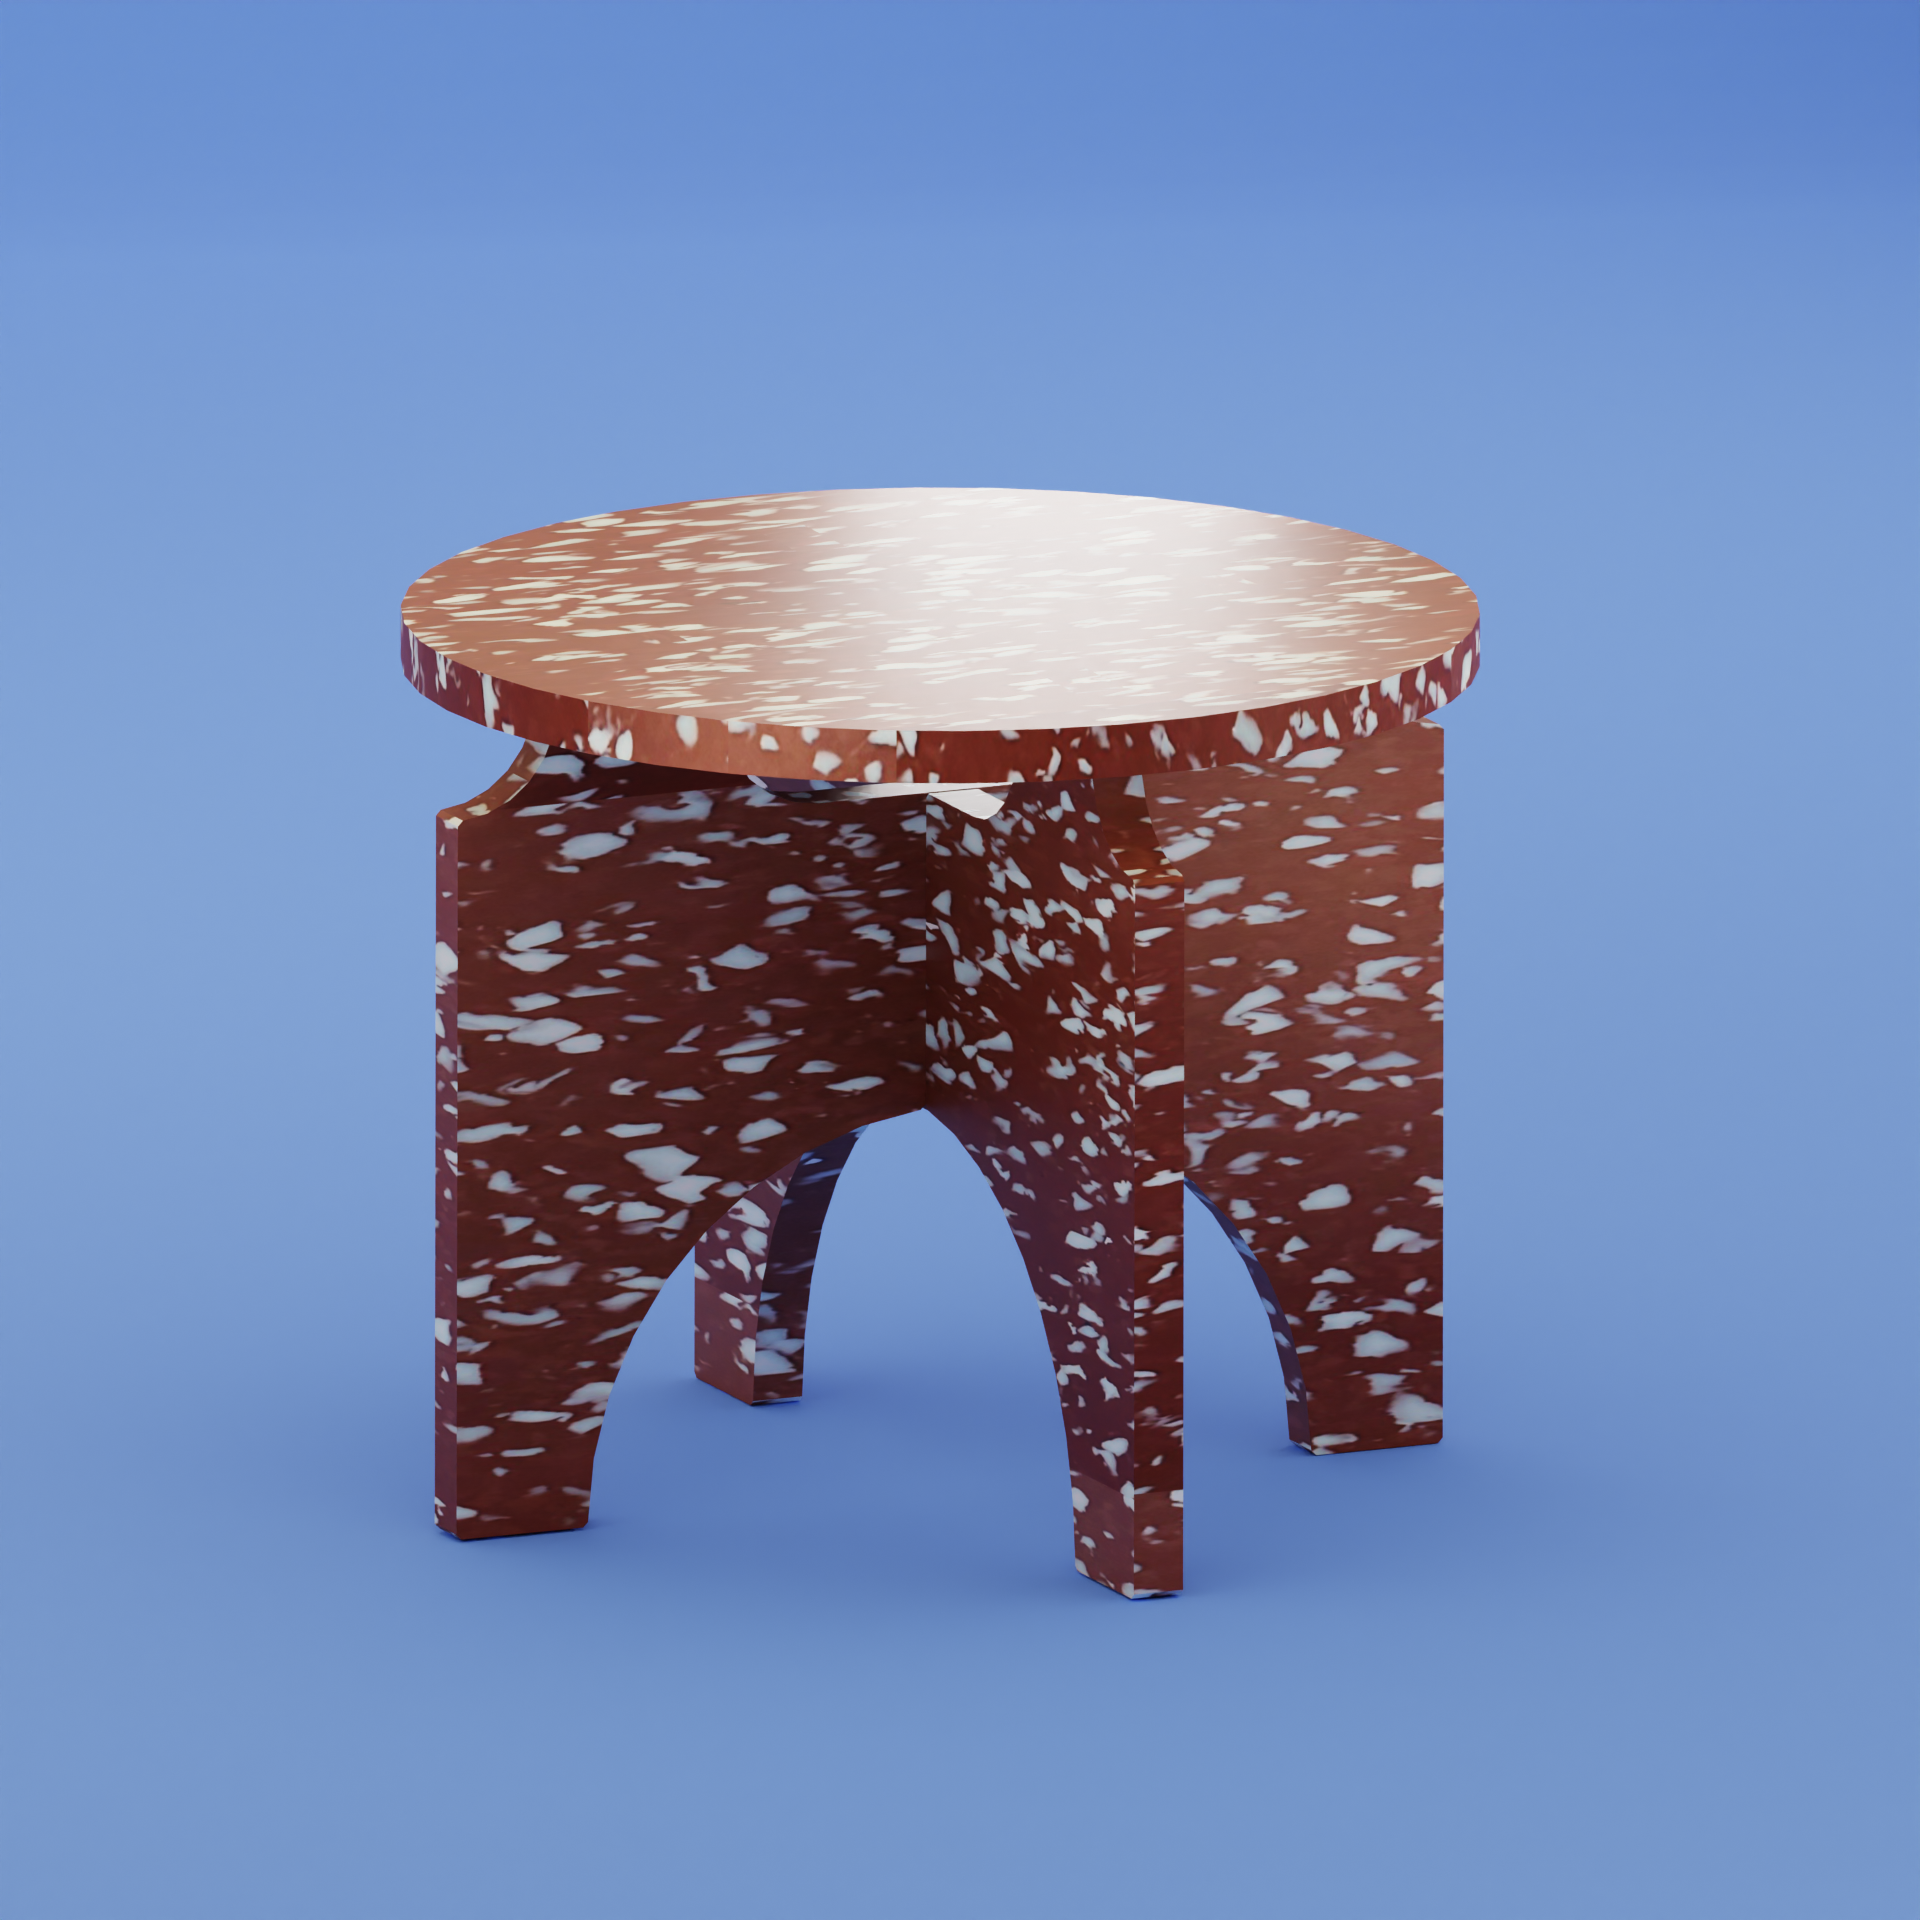 RED STOOL BY THE MINIMONO PROJECT - BRAND FOR ECO FRIENDLY - PLAYFUL - MULTI FUNCTIONAL - SUSTAINABLE - HIGH QUALITY - DESIGN FURNITURE FROM RECYCLED PLASTIC FOR BOTH ADULT AND CHILDREN MADE IN BERLIN GERMANY